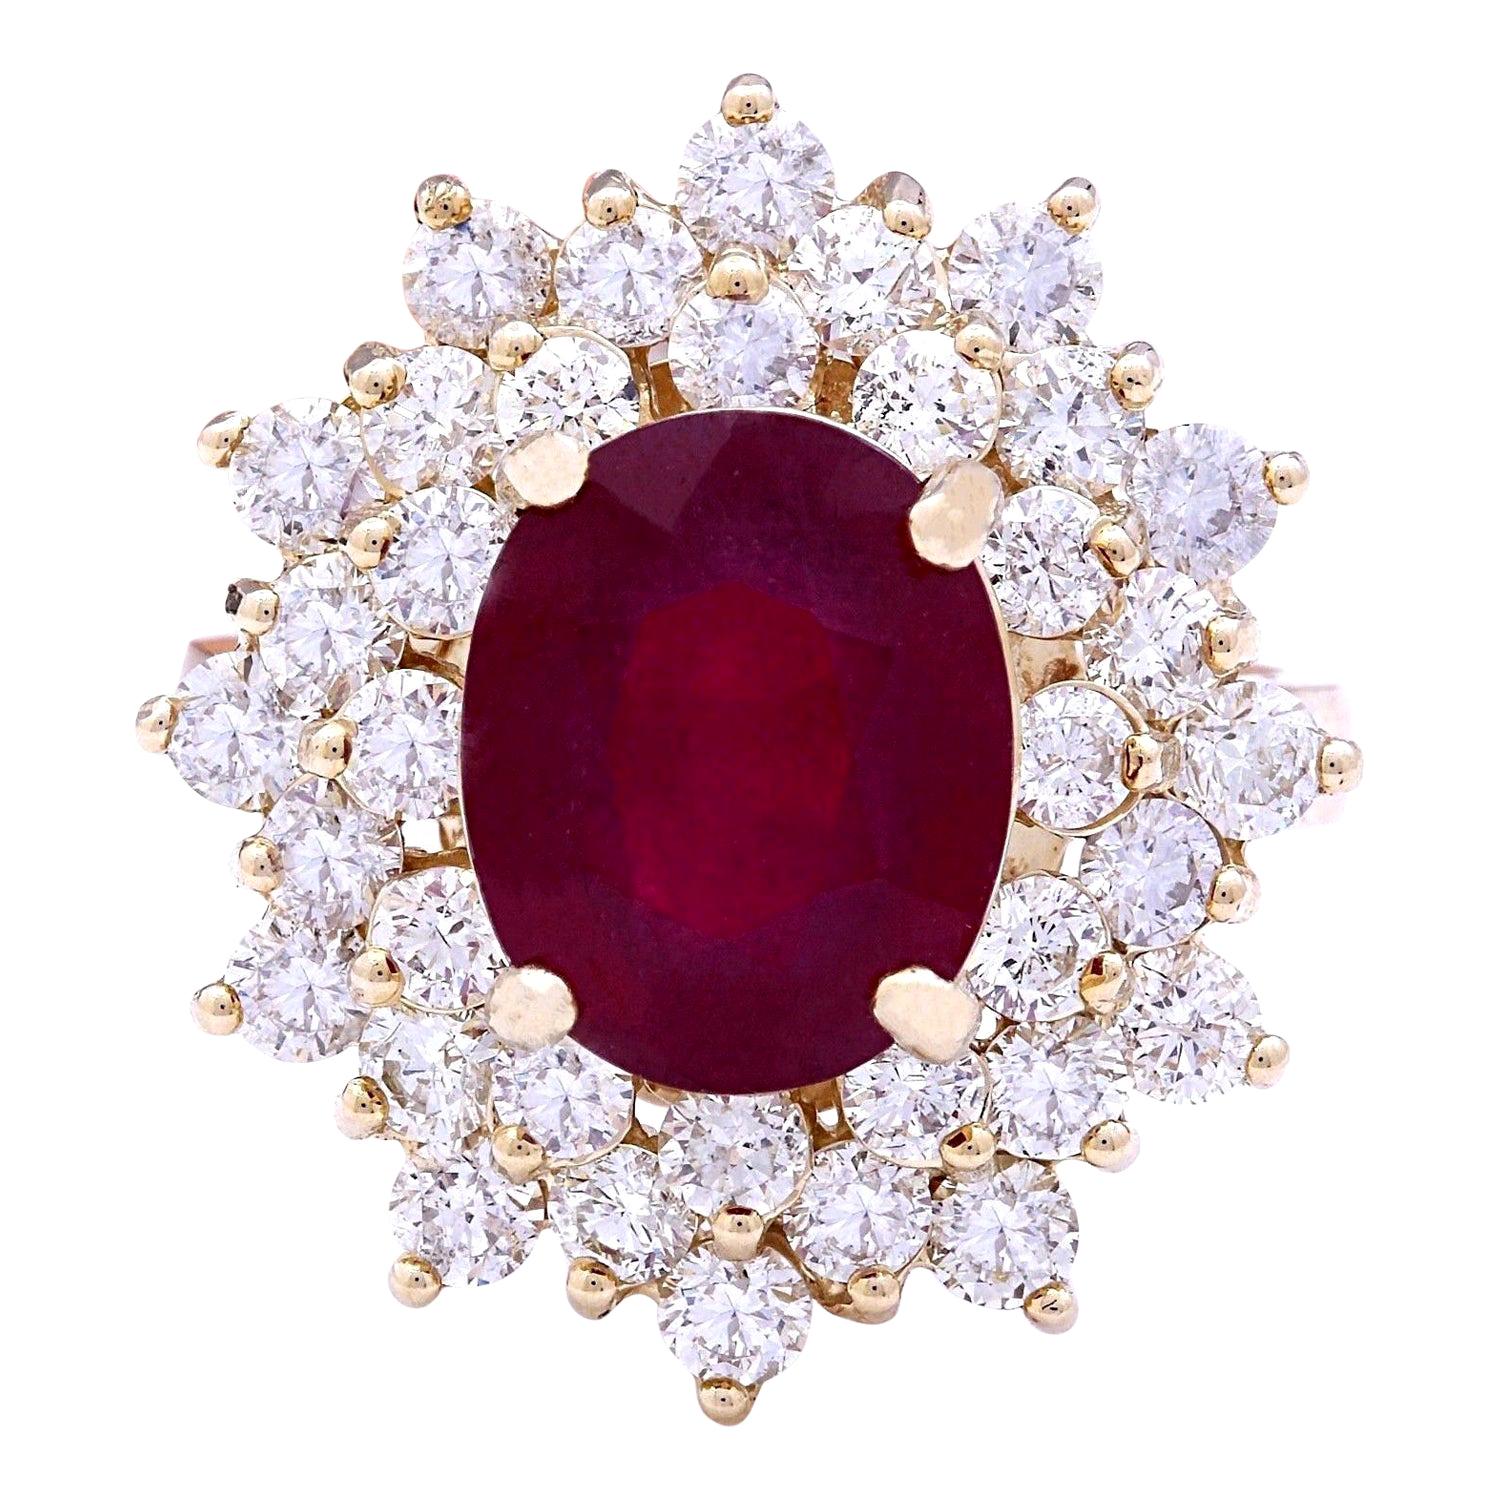 Natural Ruby Diamond Ring In 14 Karat Solid Yellow Gold 